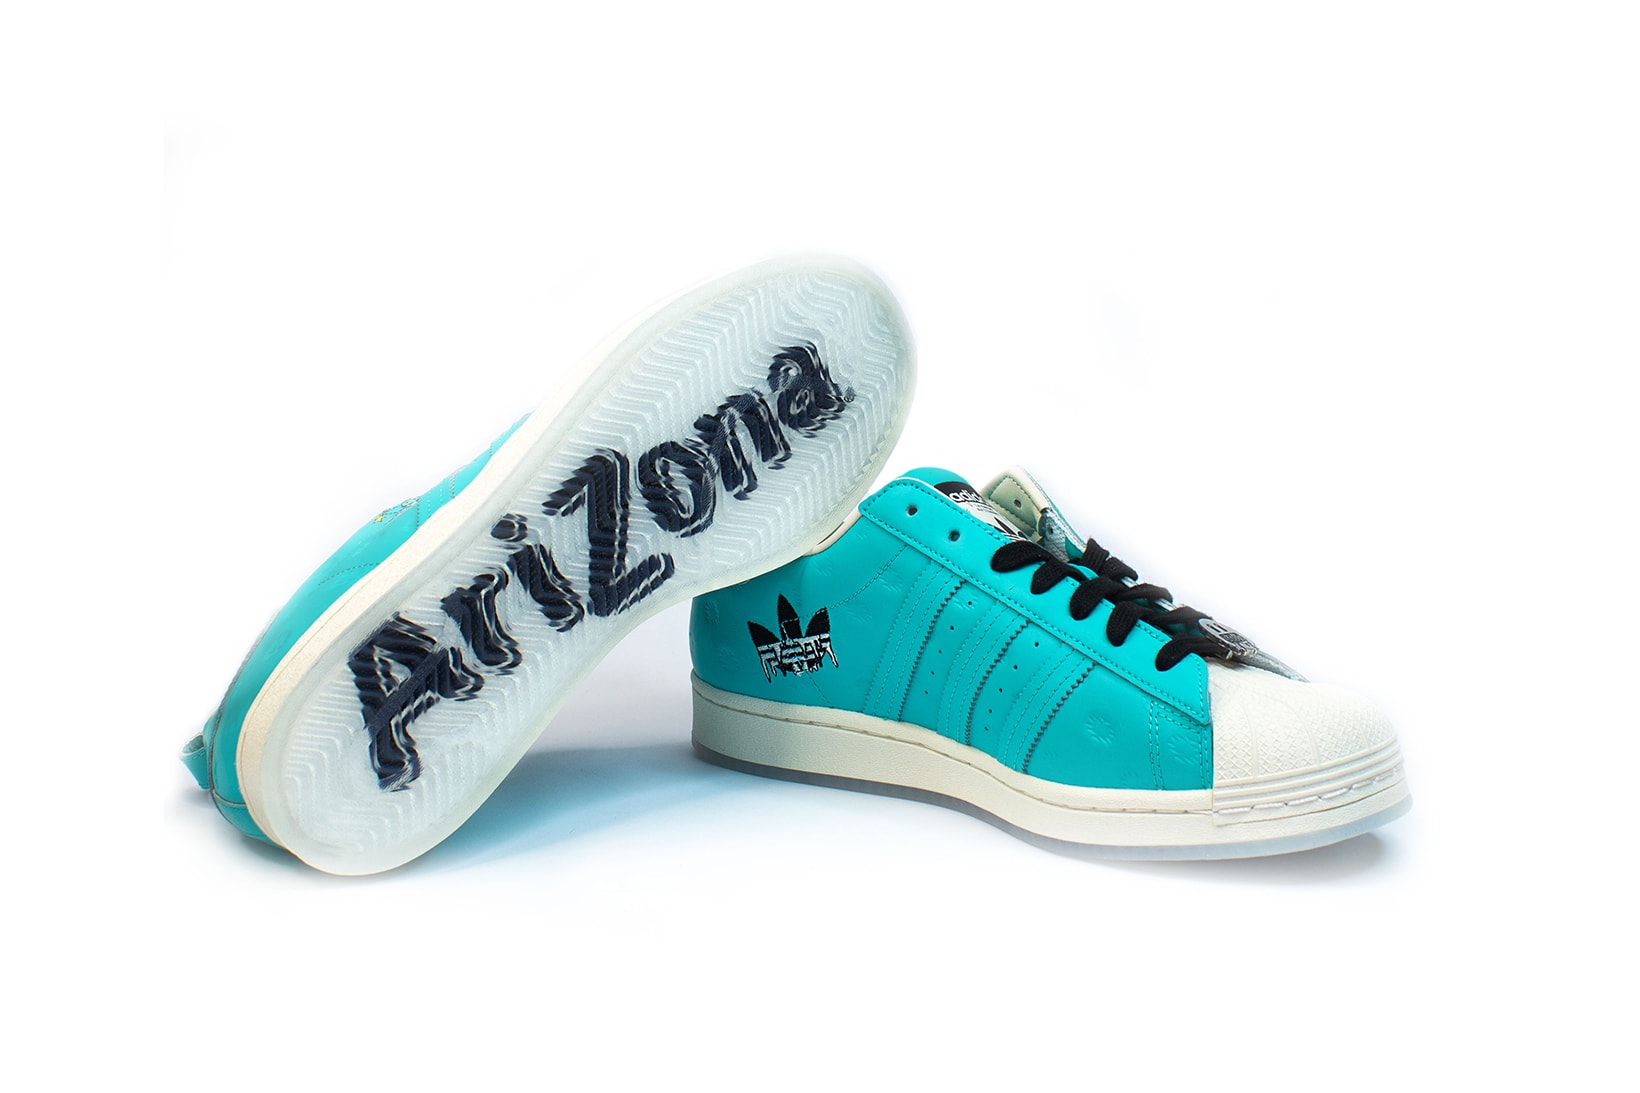 adidas originals arizona iced tea superstar collaboration sneakers big cans sole laces blue white black